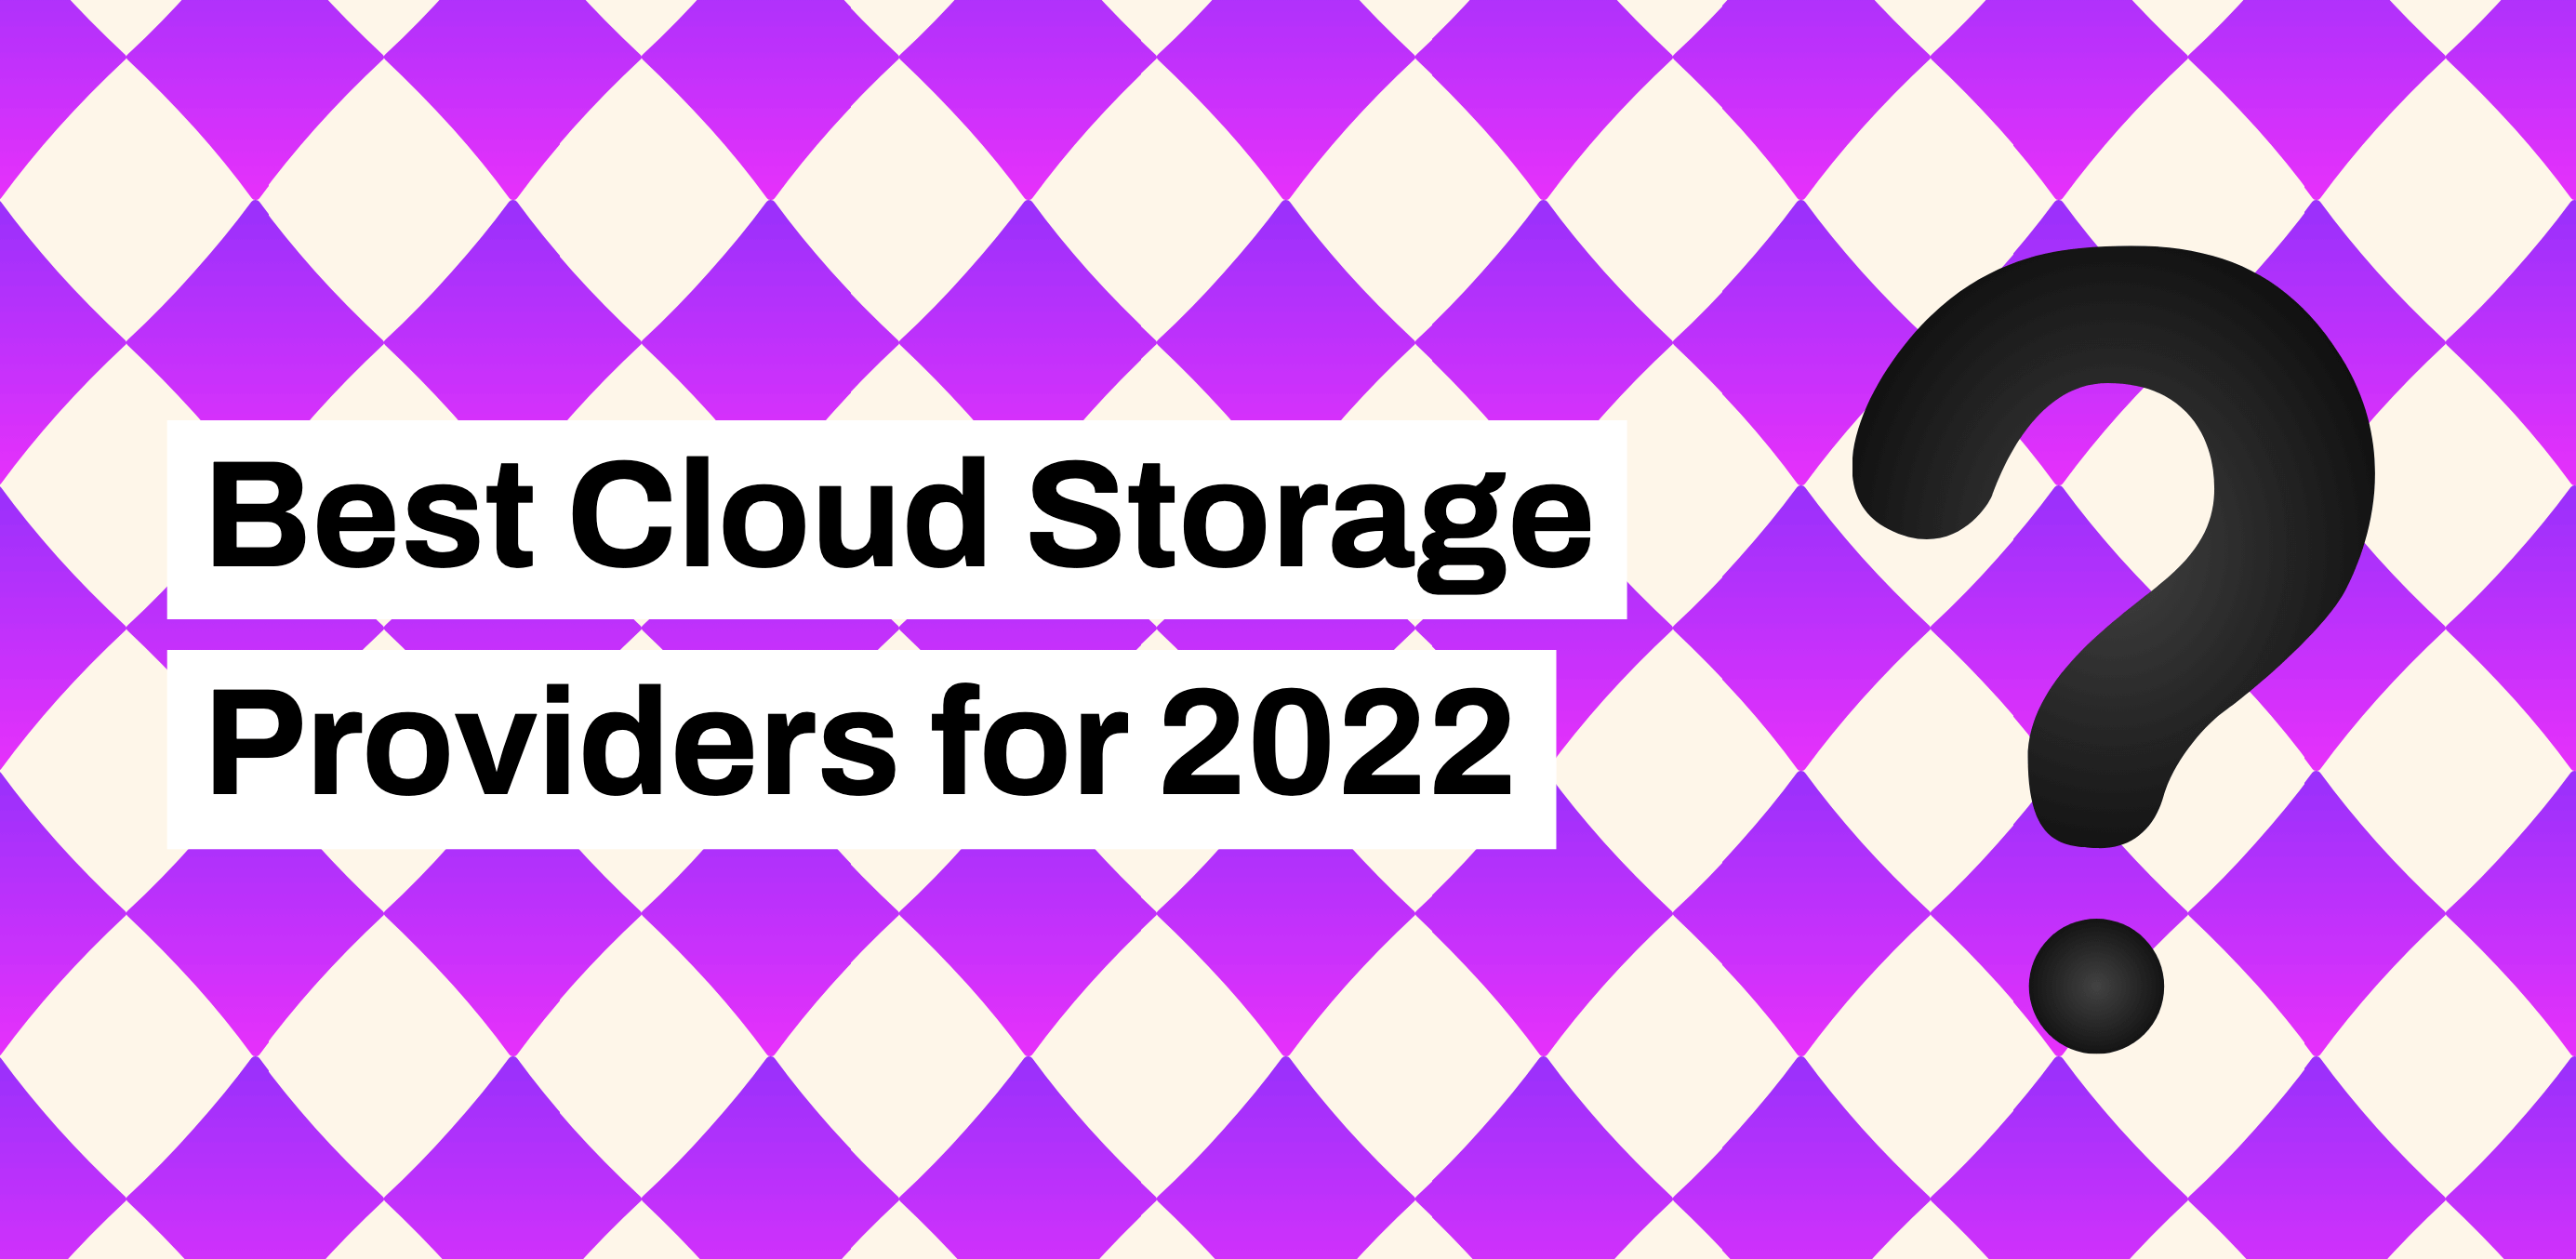 8 Cloud Storage Providers for 2022